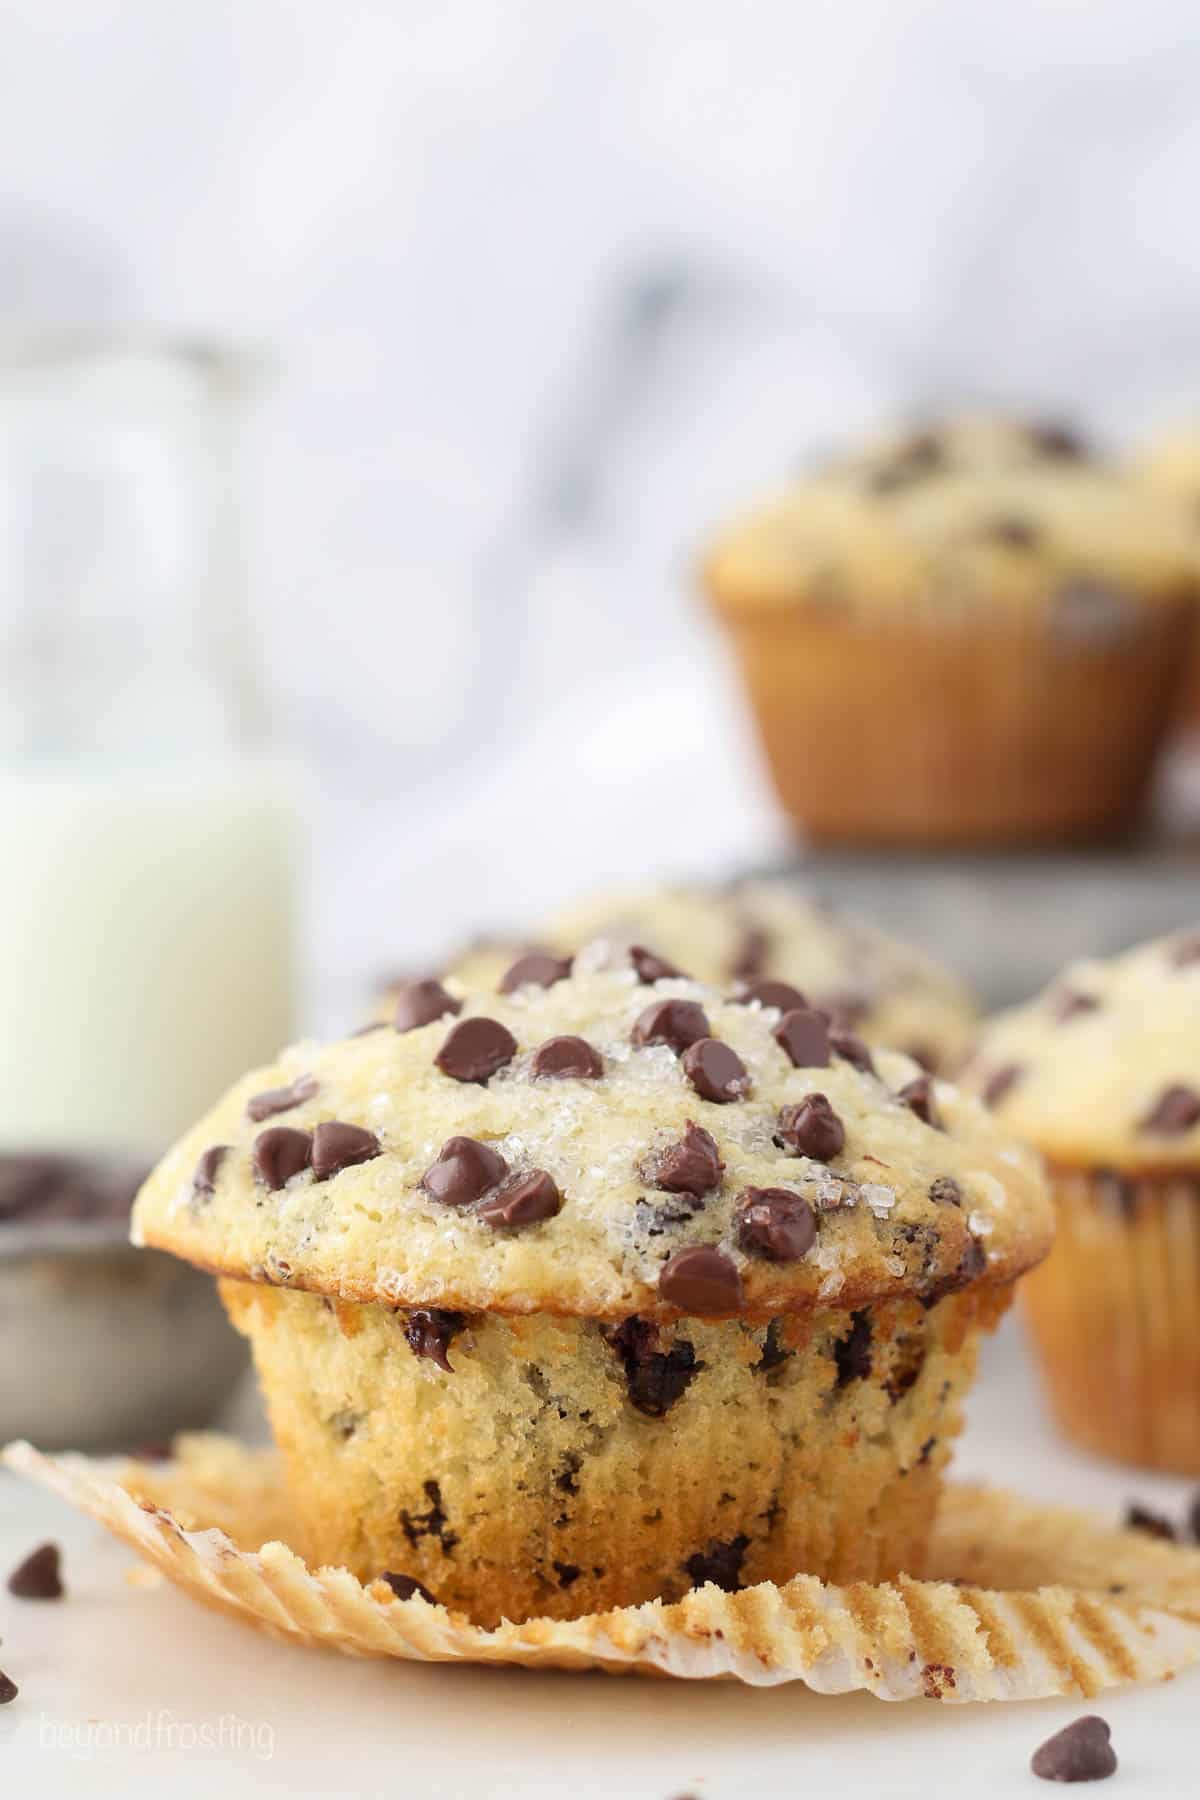 Front view of a chocolate chip muffin